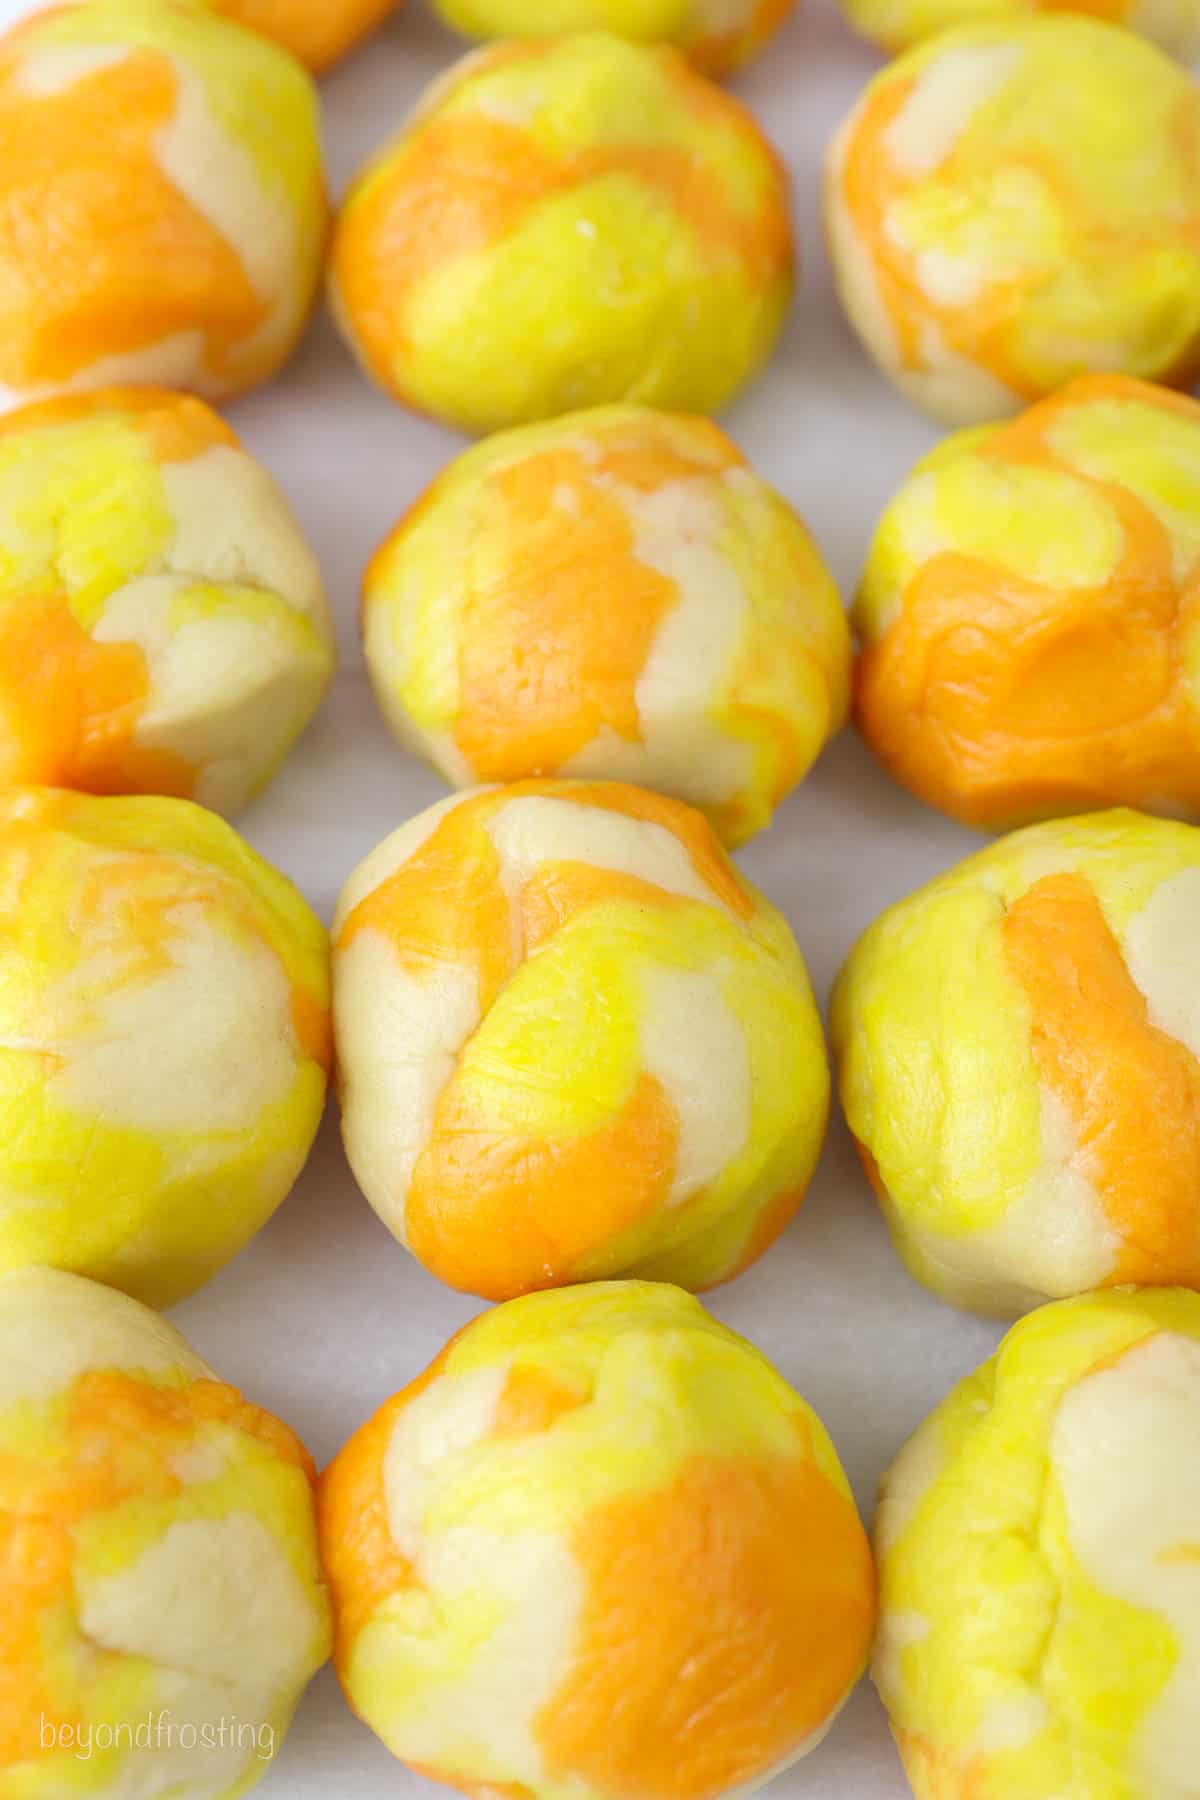 cookie dough balls lined up on parchment paper. They are colored yellow, orange and white.